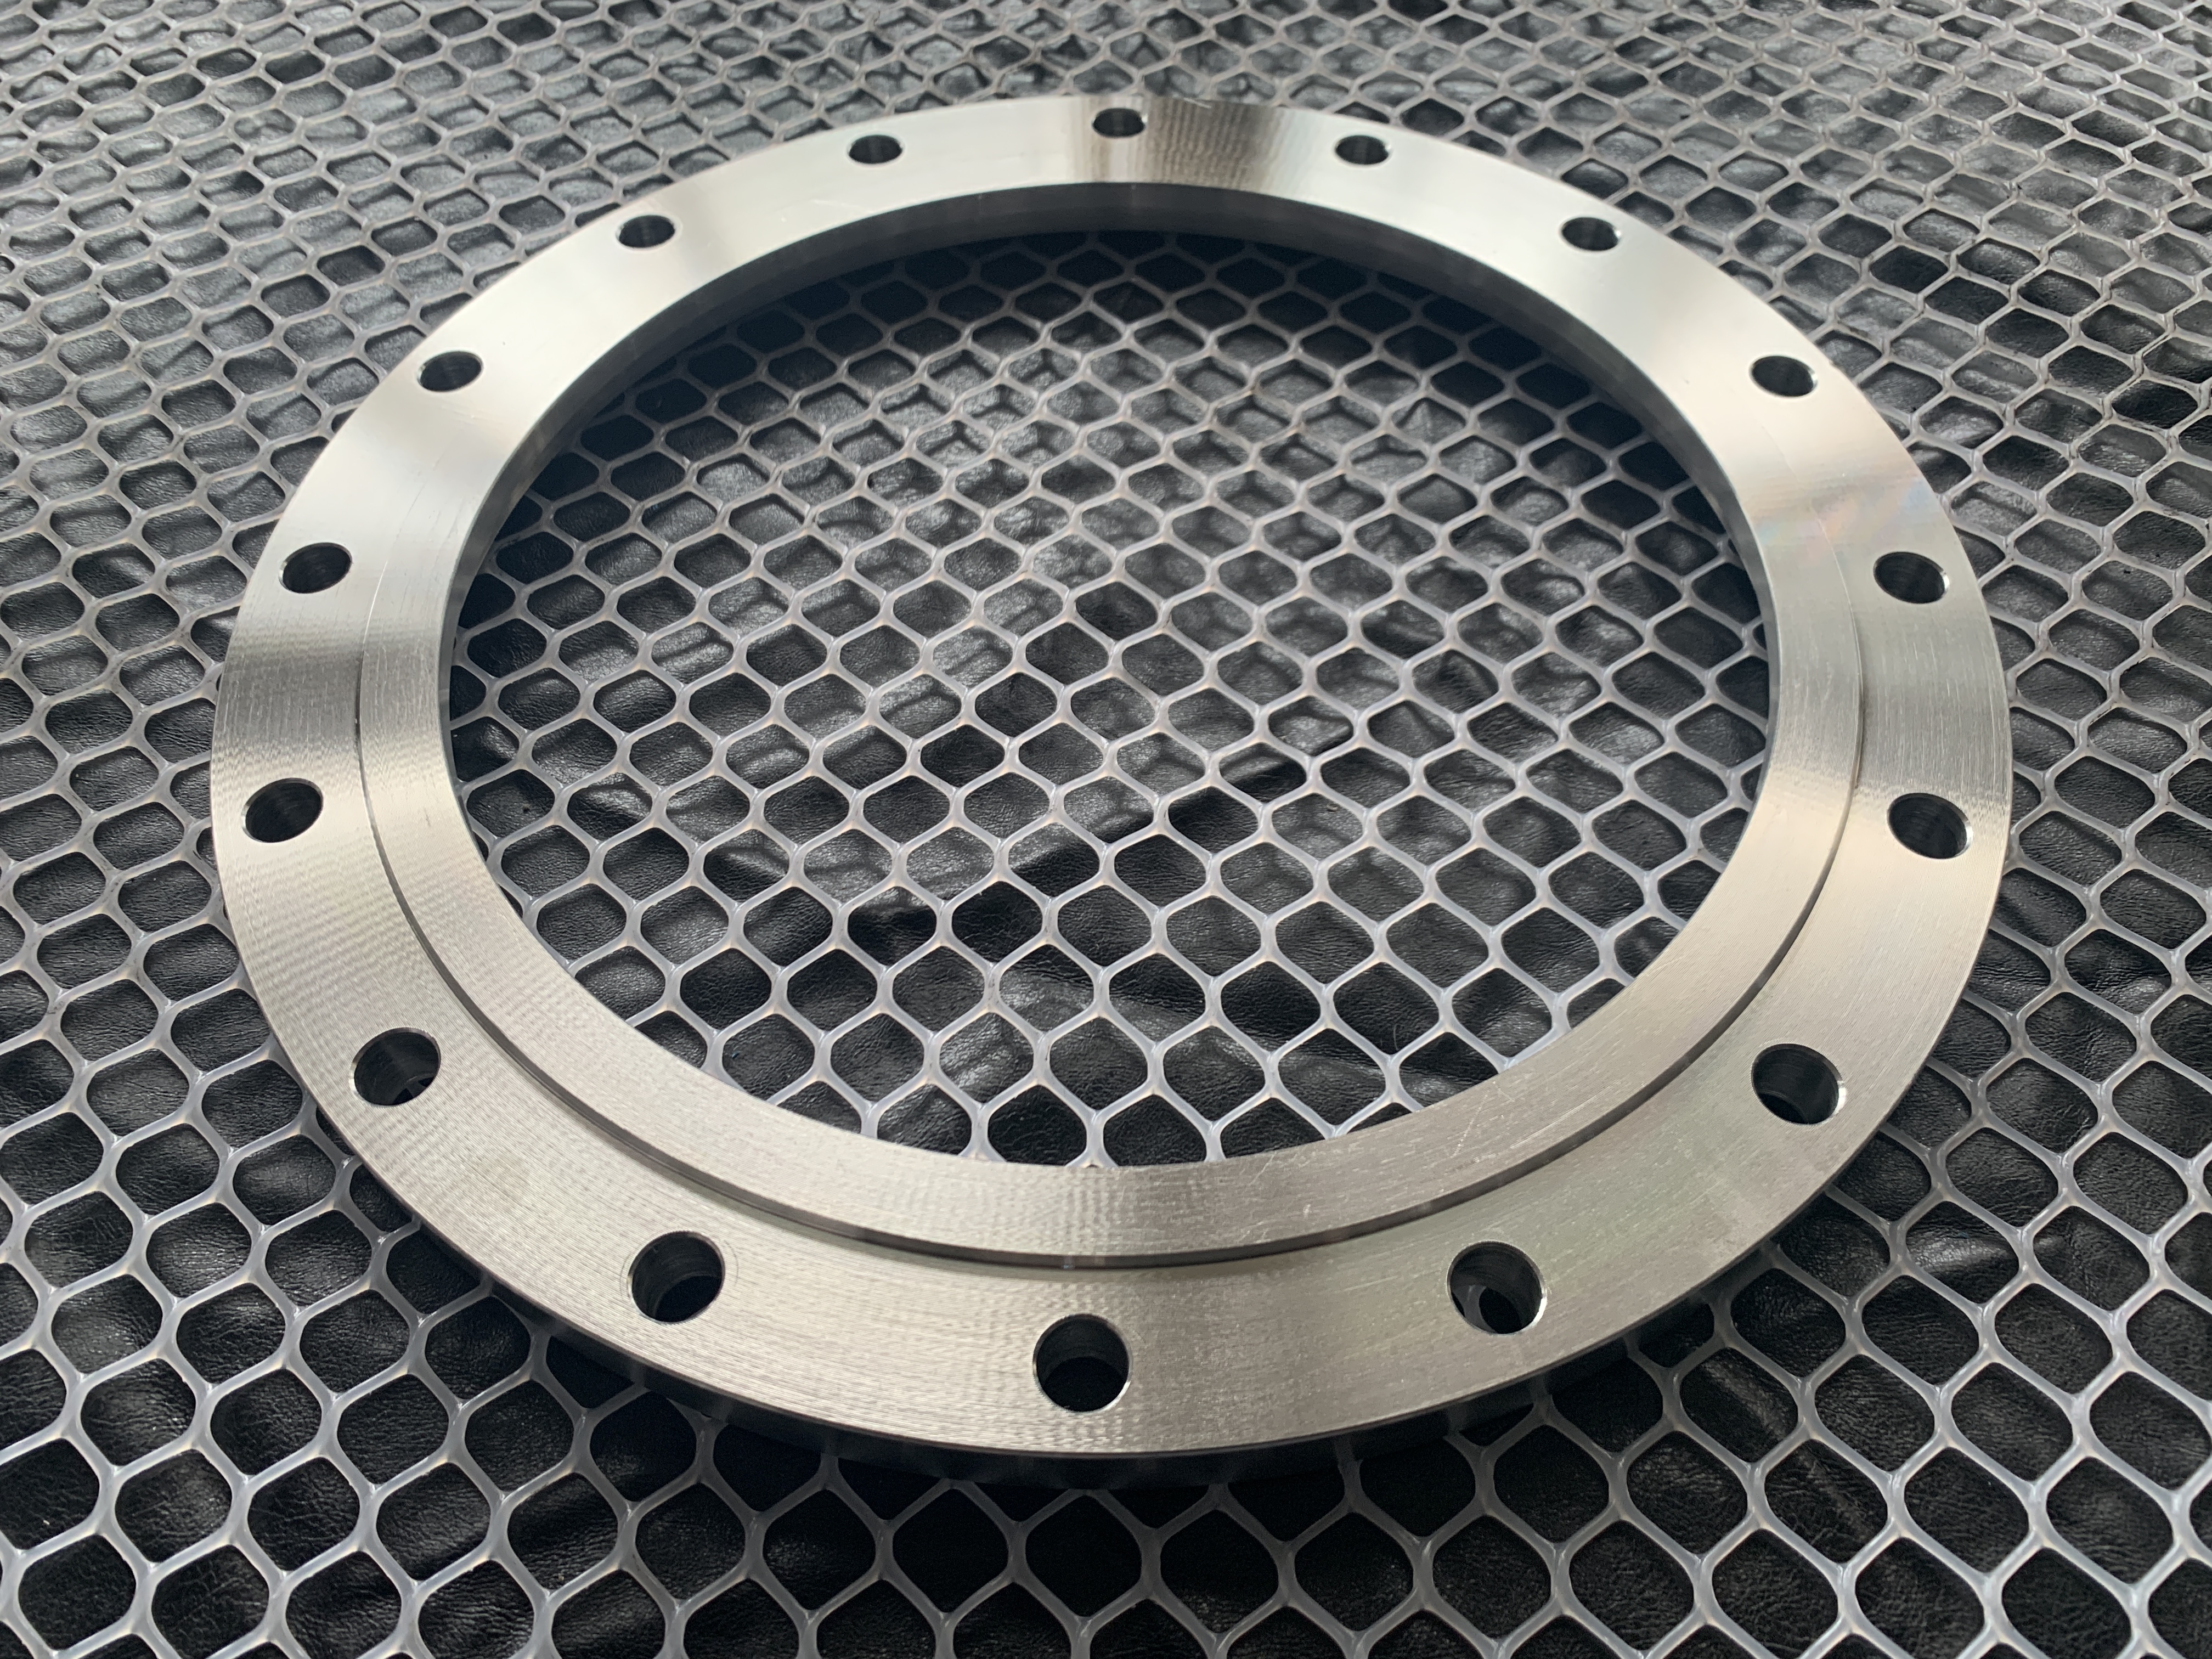 GB 2506 stainless steel froged plate flange CDPL069